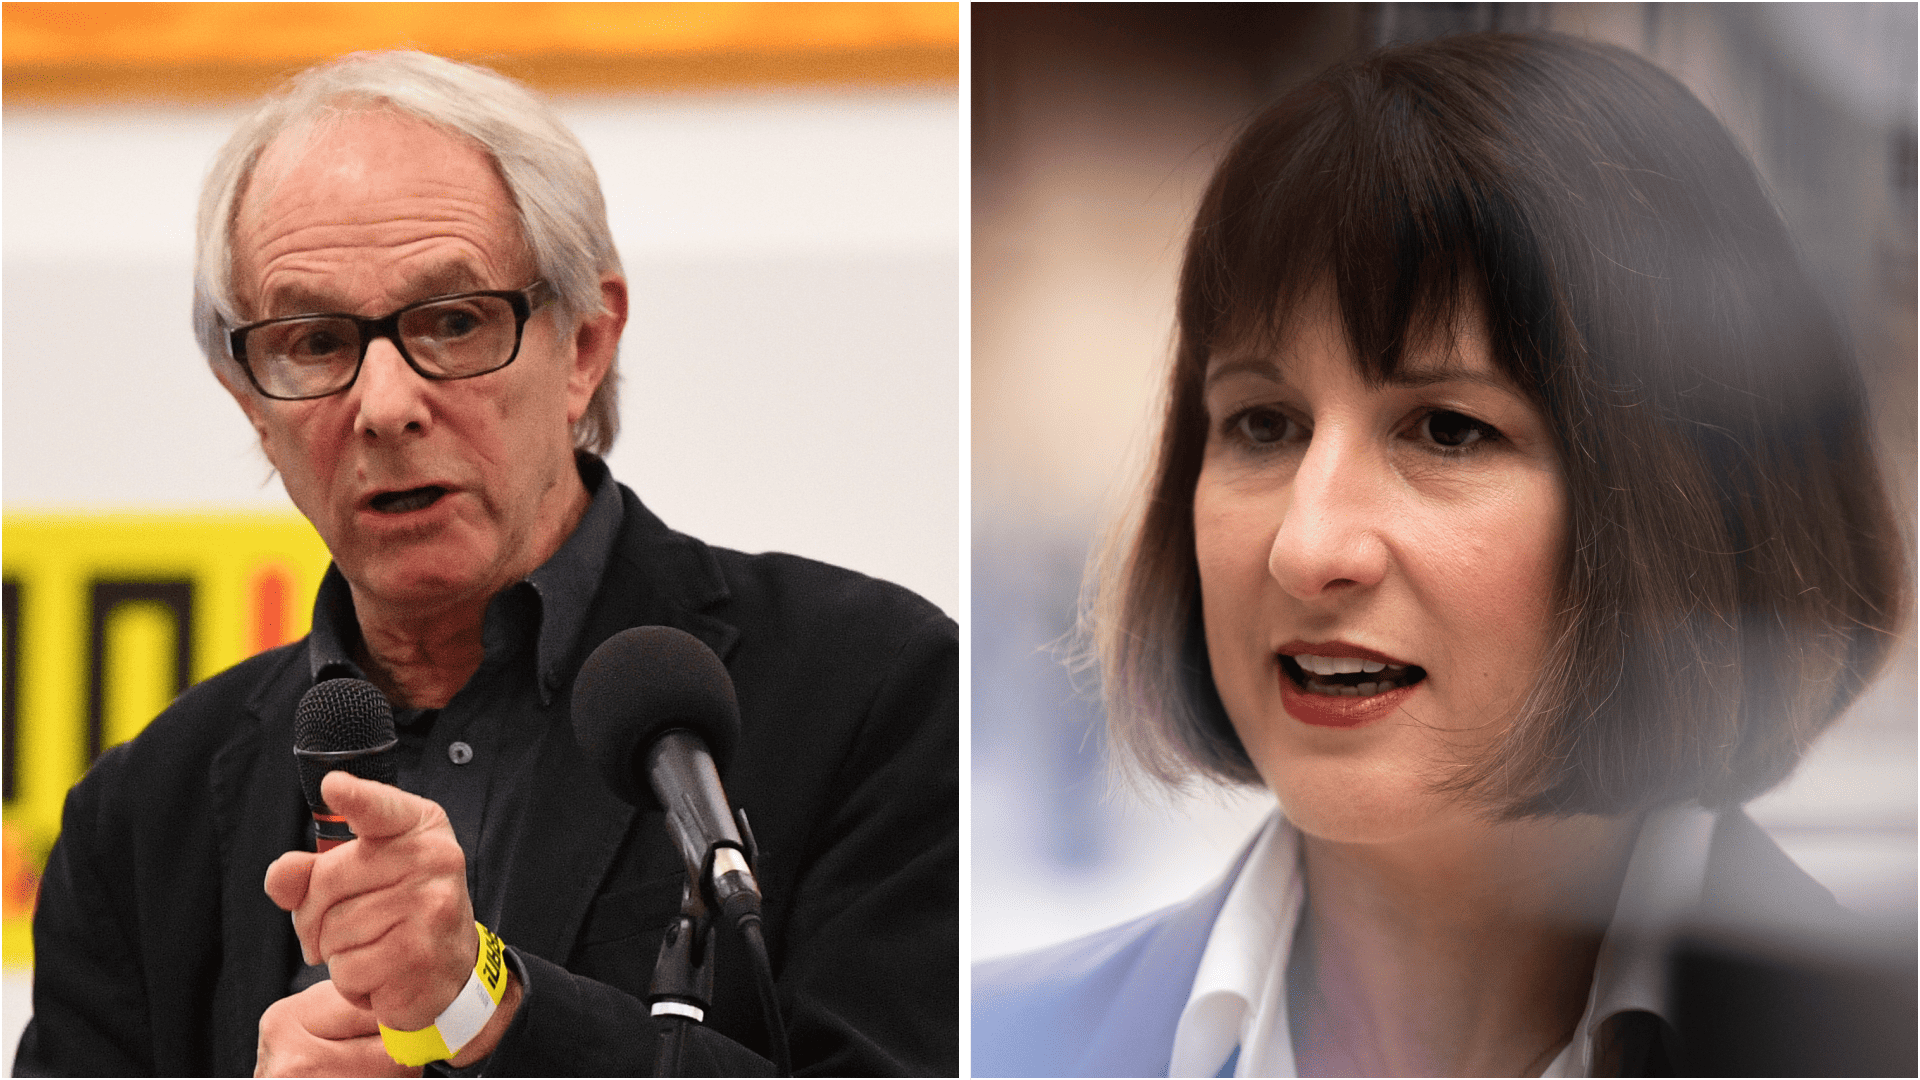 Rachel Reeves provokes outrage after branding Ken Loach an ‘antisemite’